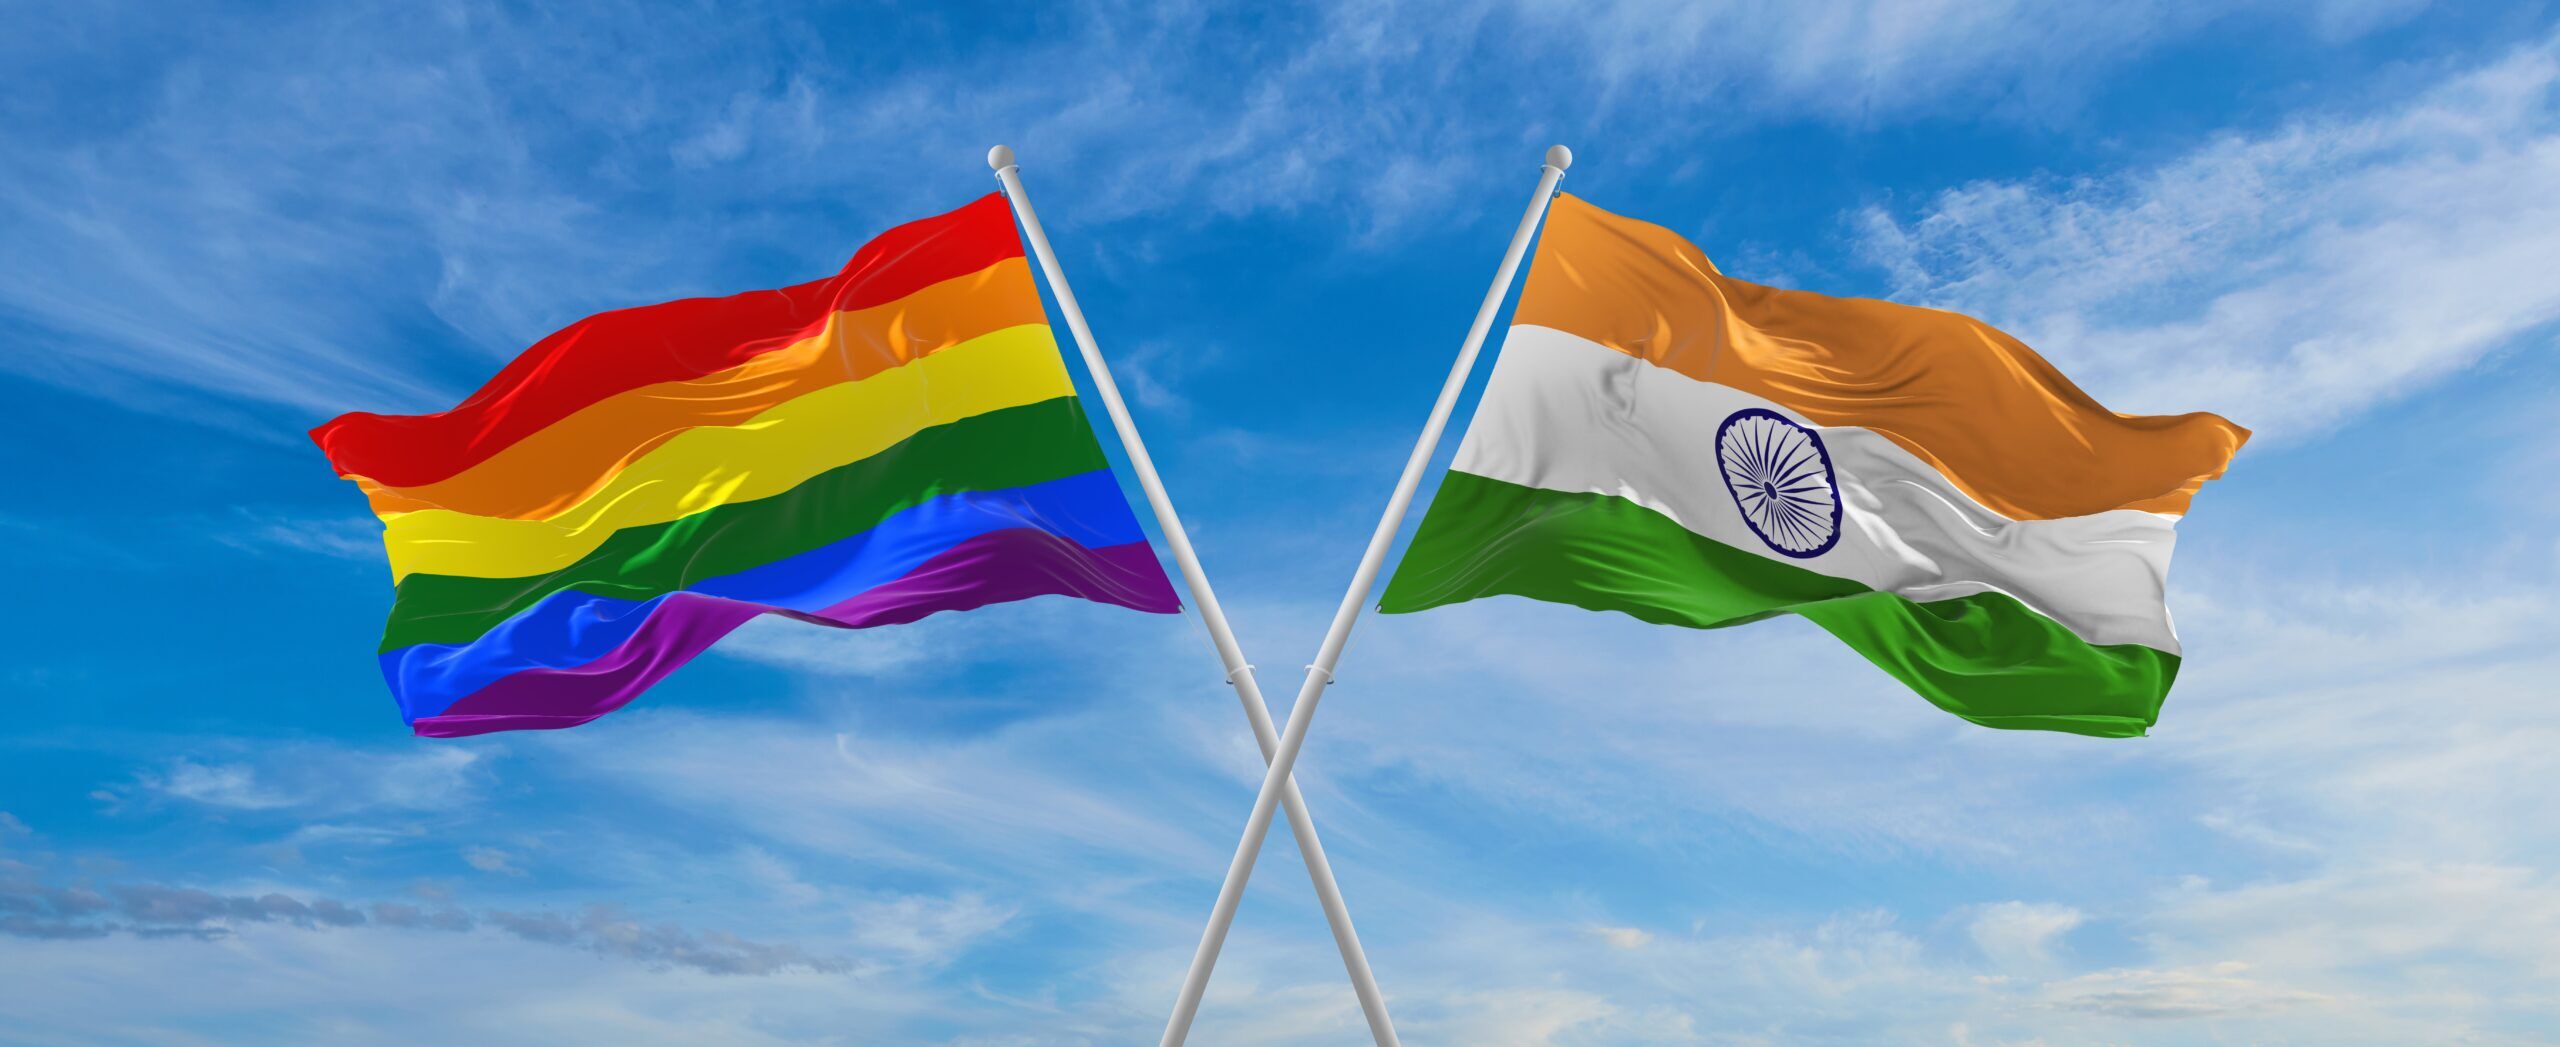 crossed flags of lgbt and India flag waving in the wind at cloudy sky. Freedom and love concept. Pride month. activism, community and freedom Concept. Copy space. 3d illustration